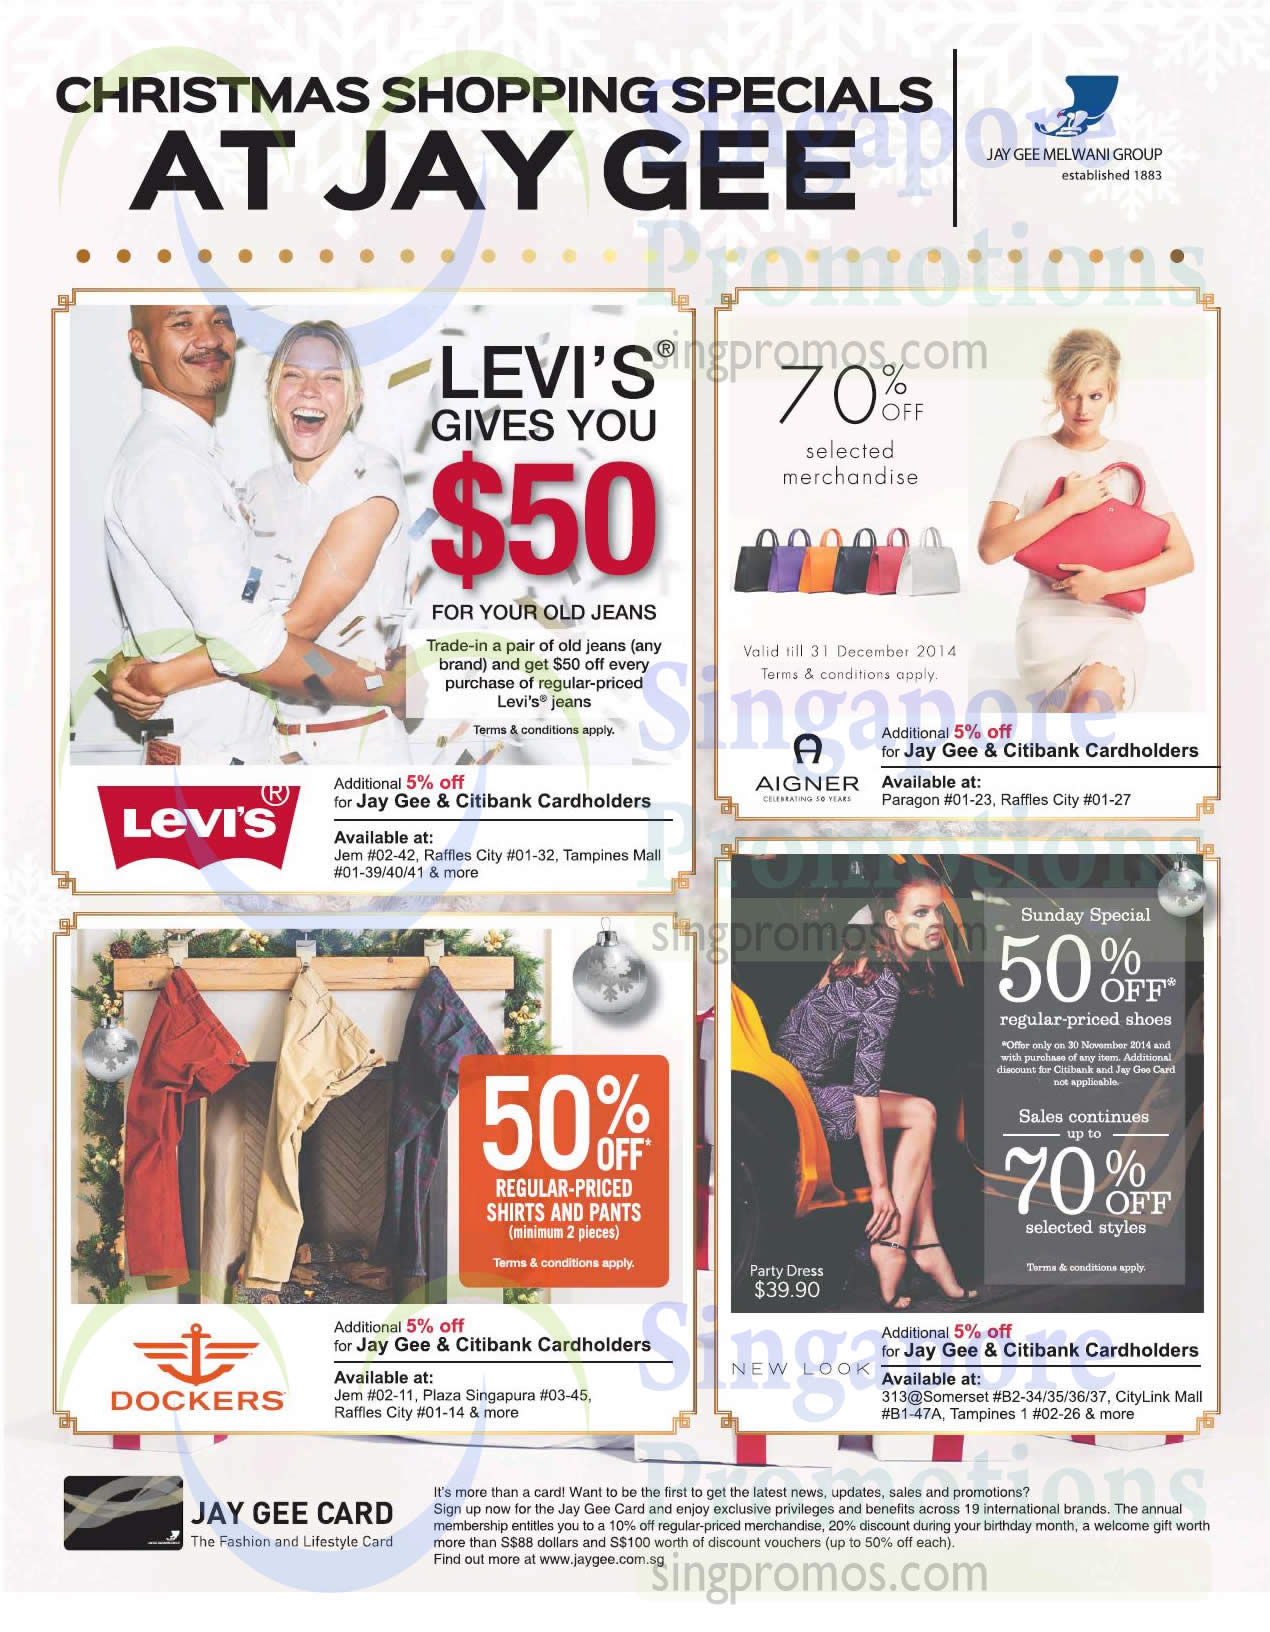 Featured image for Citibank & Jay Gee Card Fashion Deals & Promotions 28 Nov - 31 Dec 2014